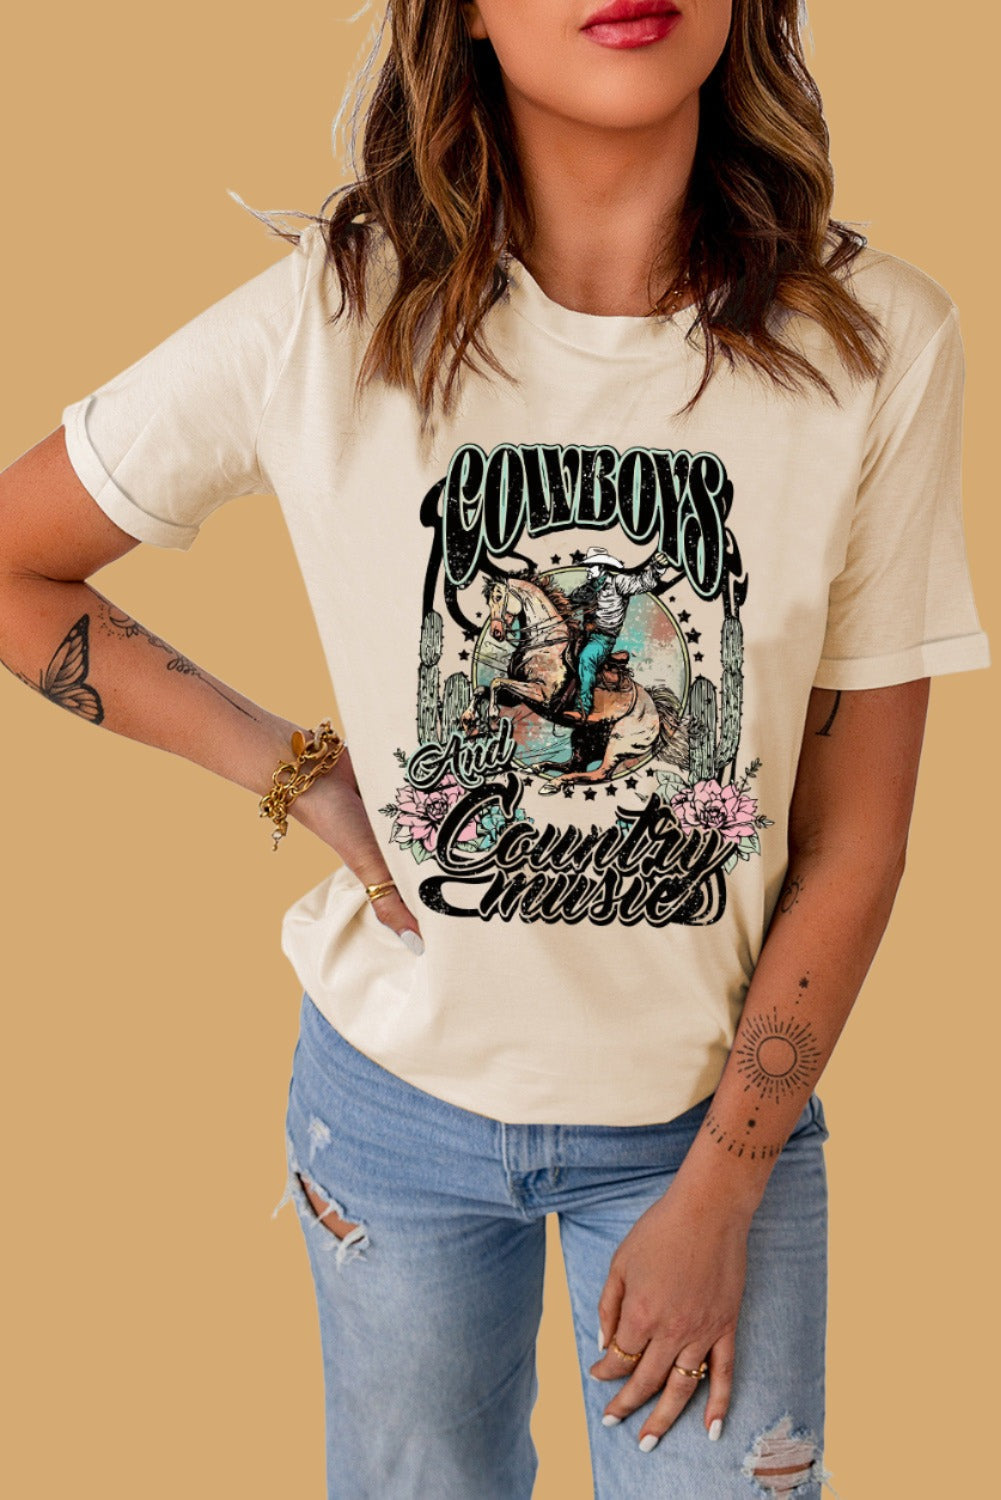 "Cowboys & Country Music" Graphic T-Shirt